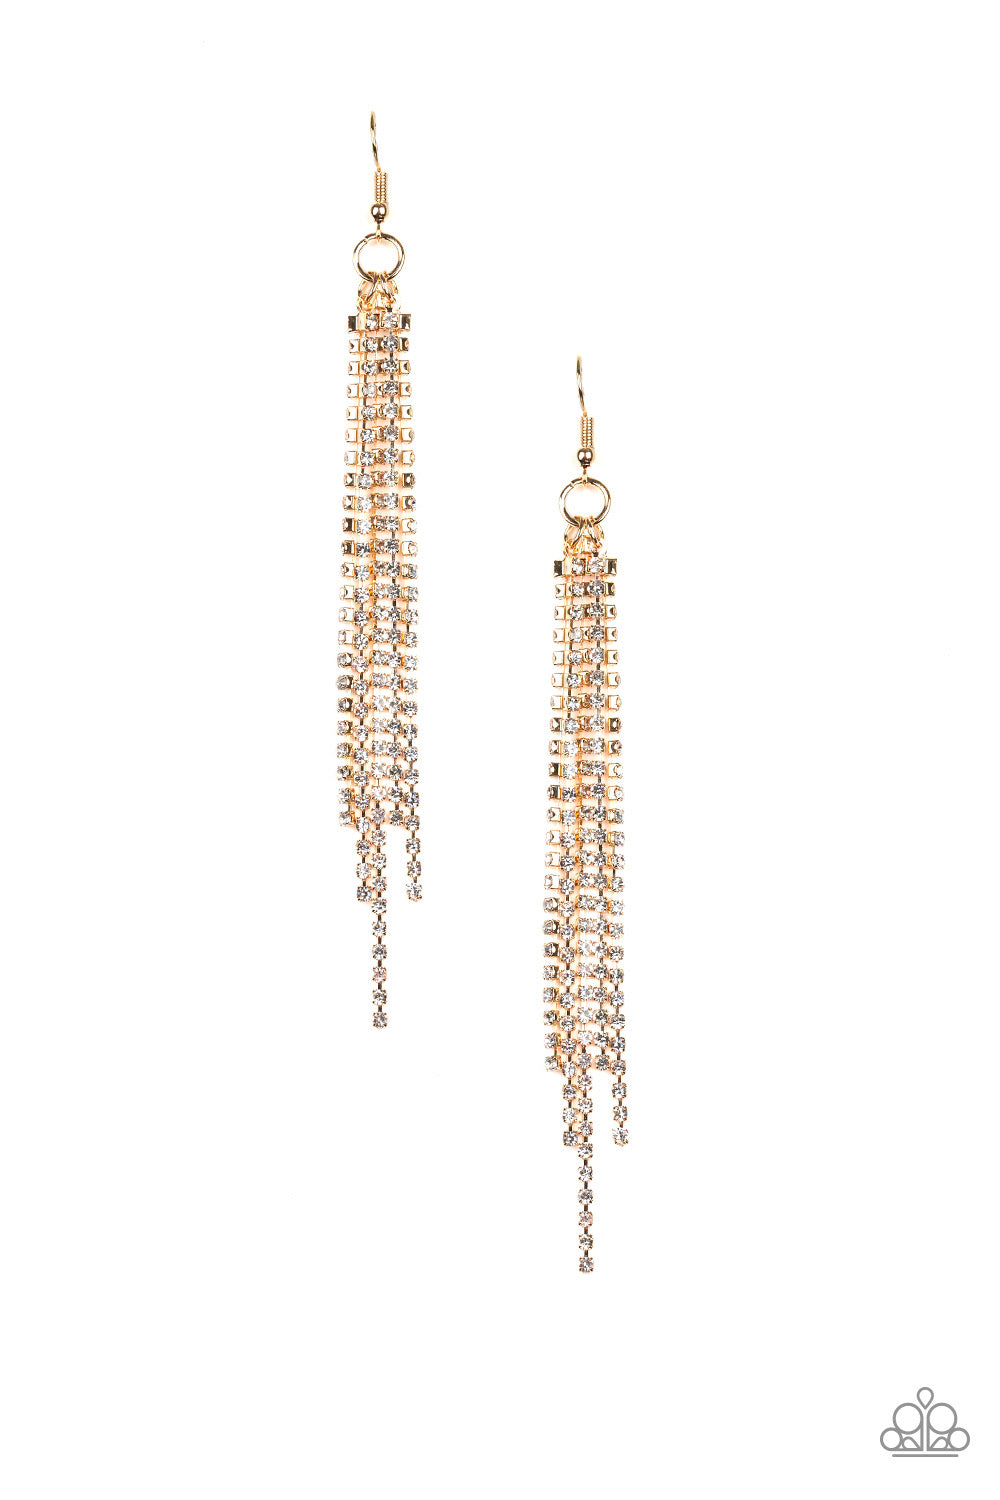 Center Stage Status Gold-Earrings